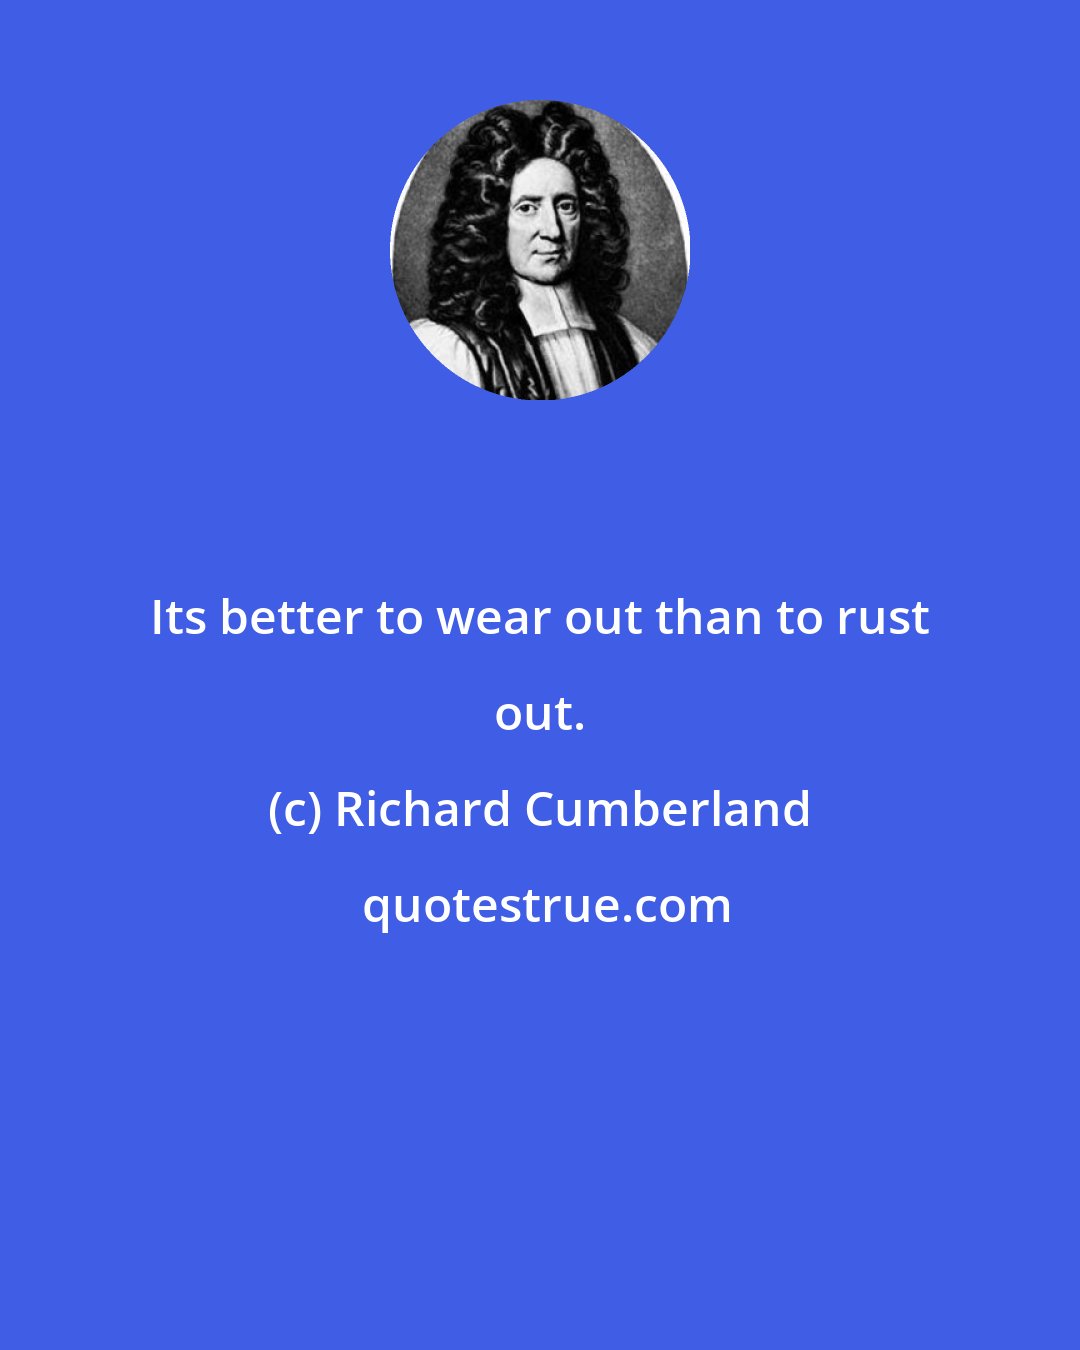 Richard Cumberland: Its better to wear out than to rust out.